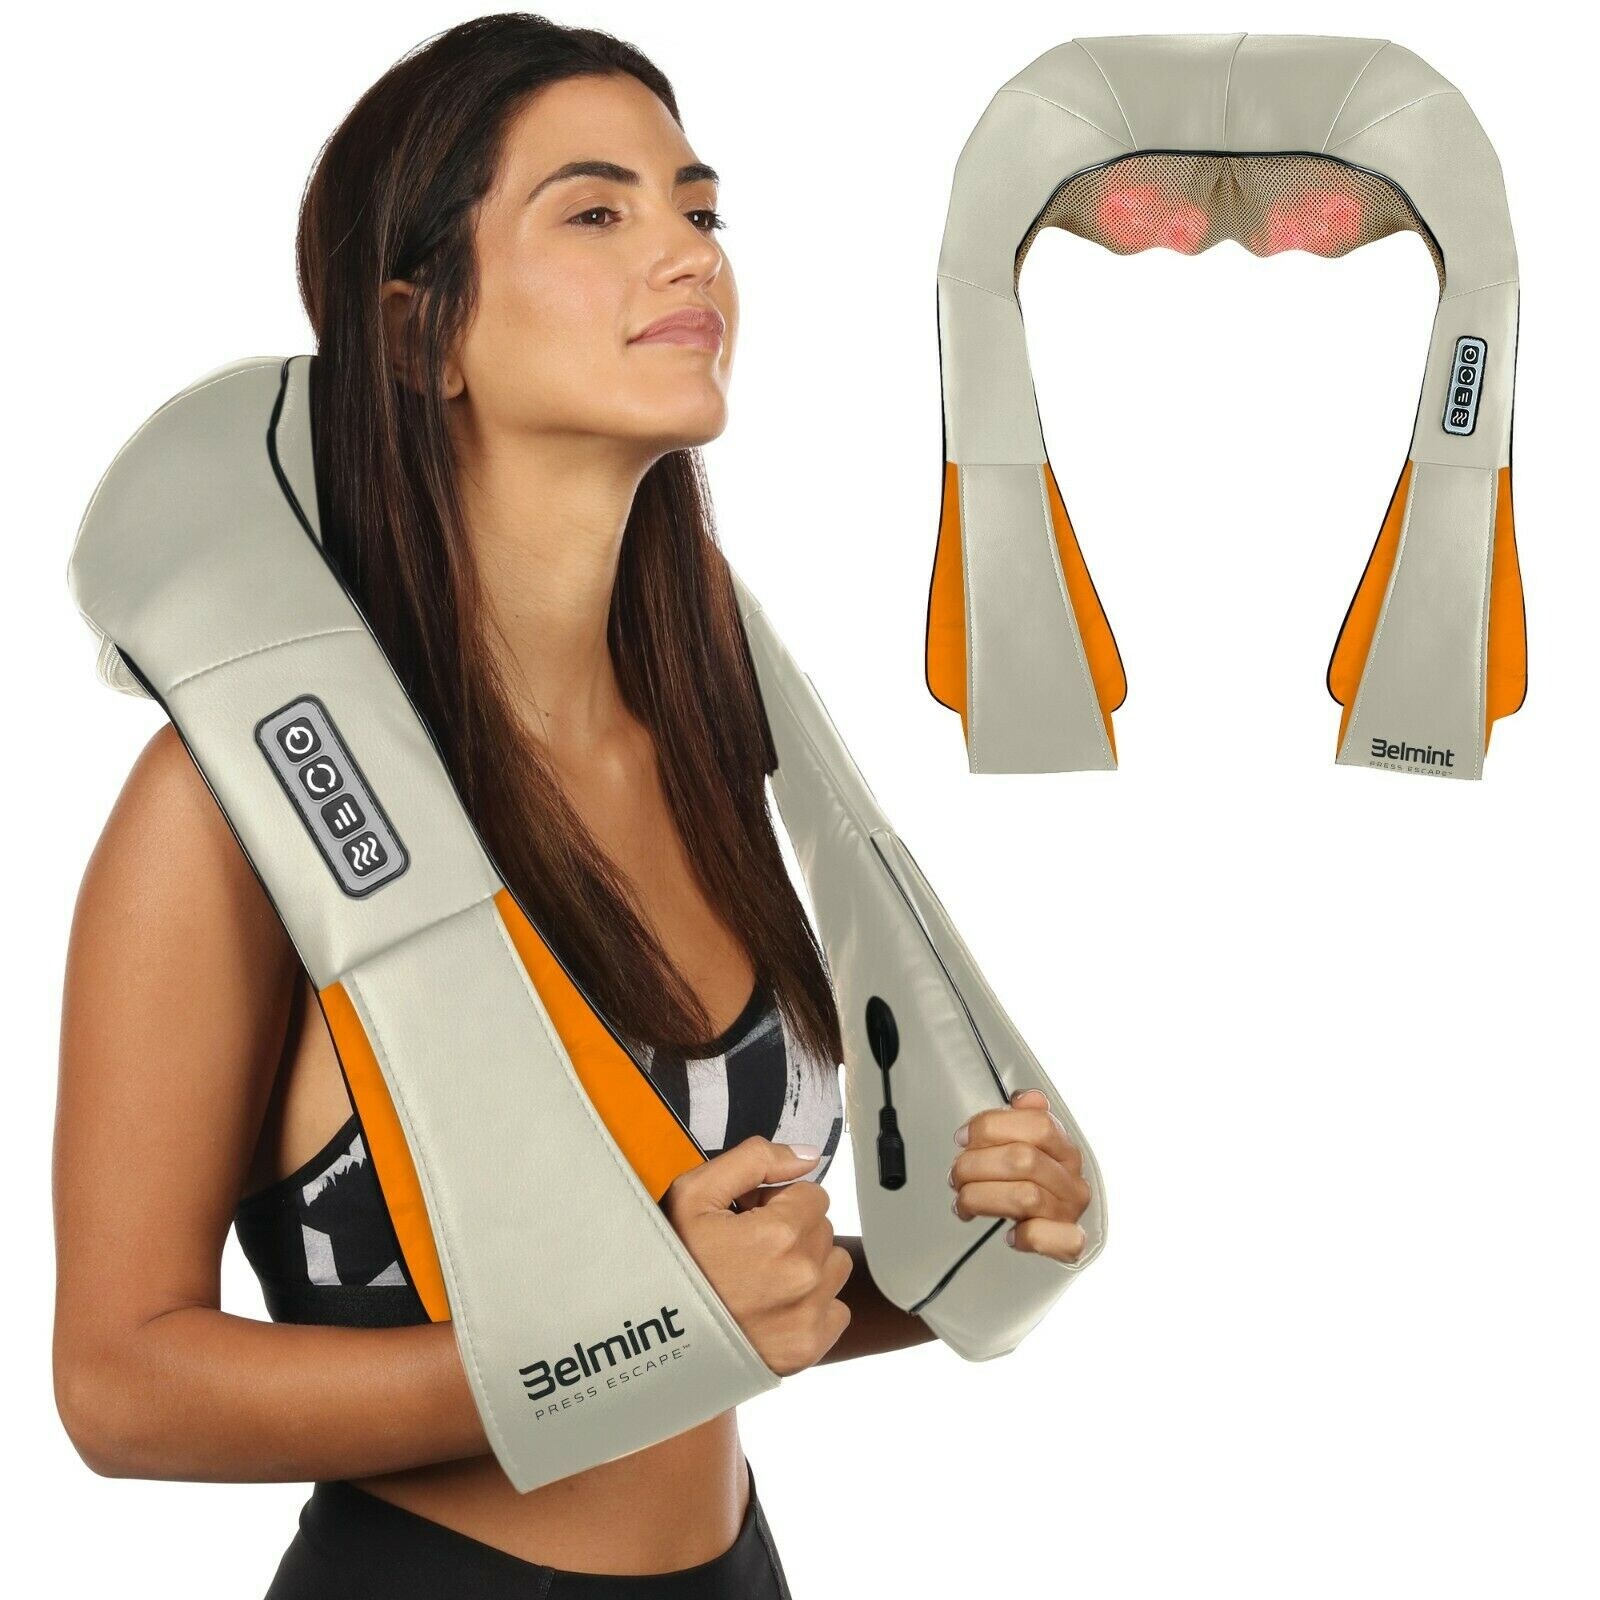 https://ak1.ostkcdn.com/images/products/is/images/direct/a03a9e5f5eee84133201e44d50d5630c4dc79afd/Belmint-Shiatsu-Kneading-Neck-%26-Back-Massager-with-Heat---Beige.jpg